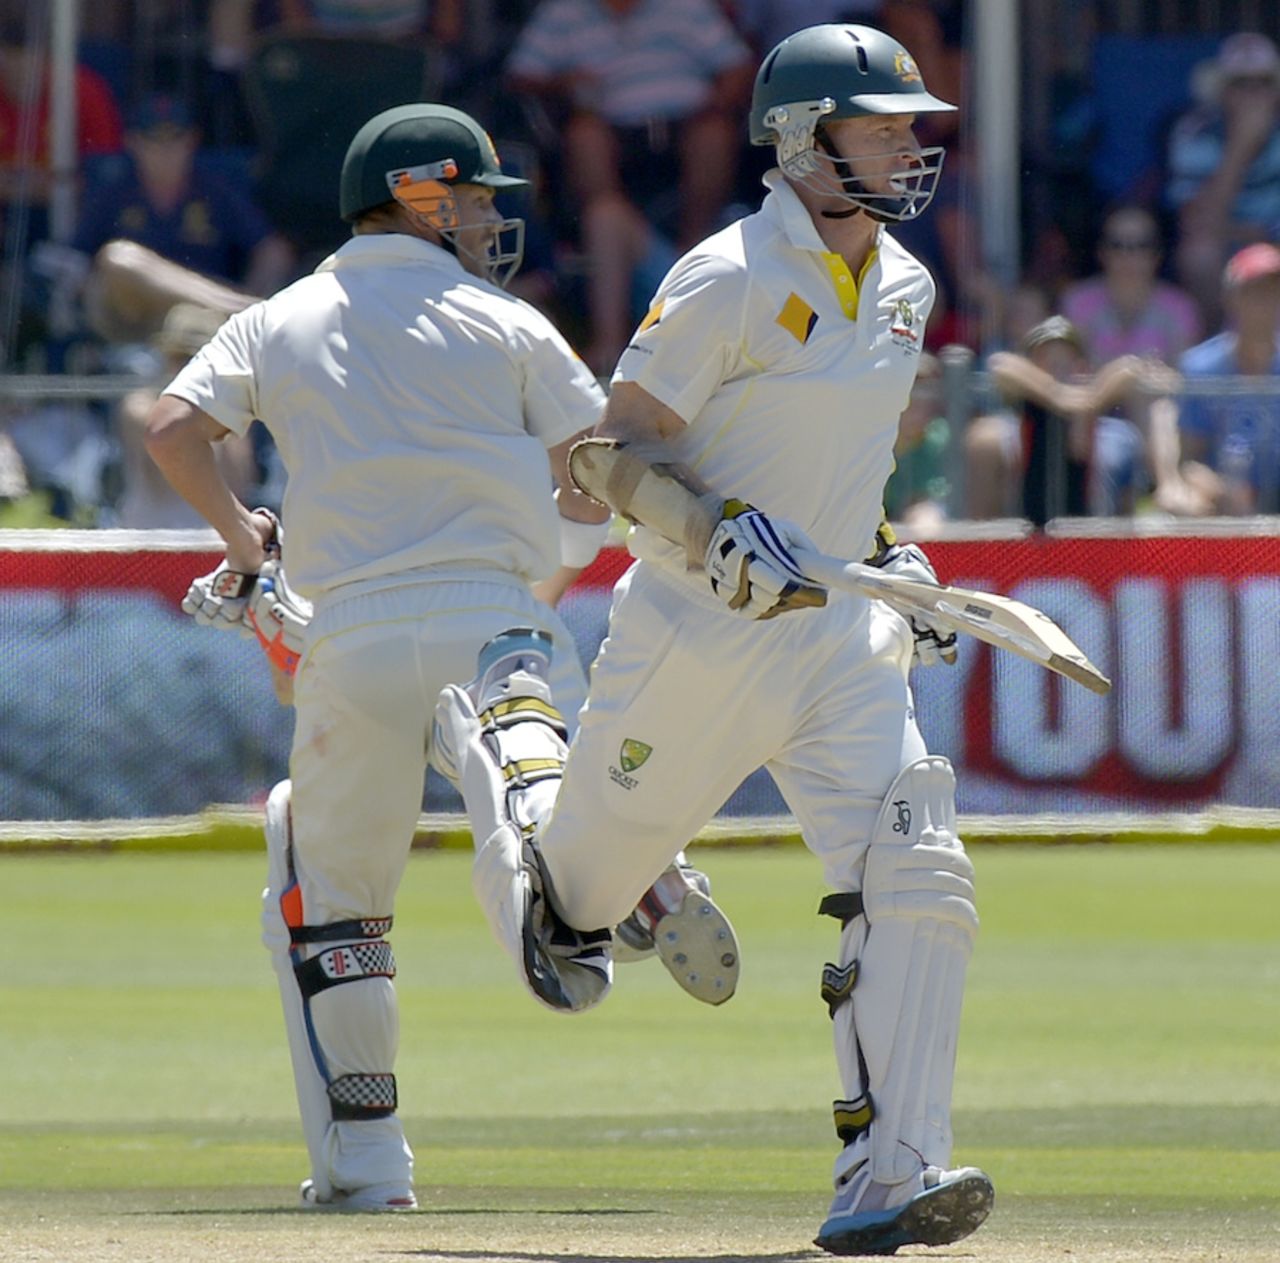 Chris Rogers and David Warner negotiated the eight overs before lunch comfortably, South Africa v Australia, 2nd Test, Port Elizabeth, 4th day, February 23, 2014